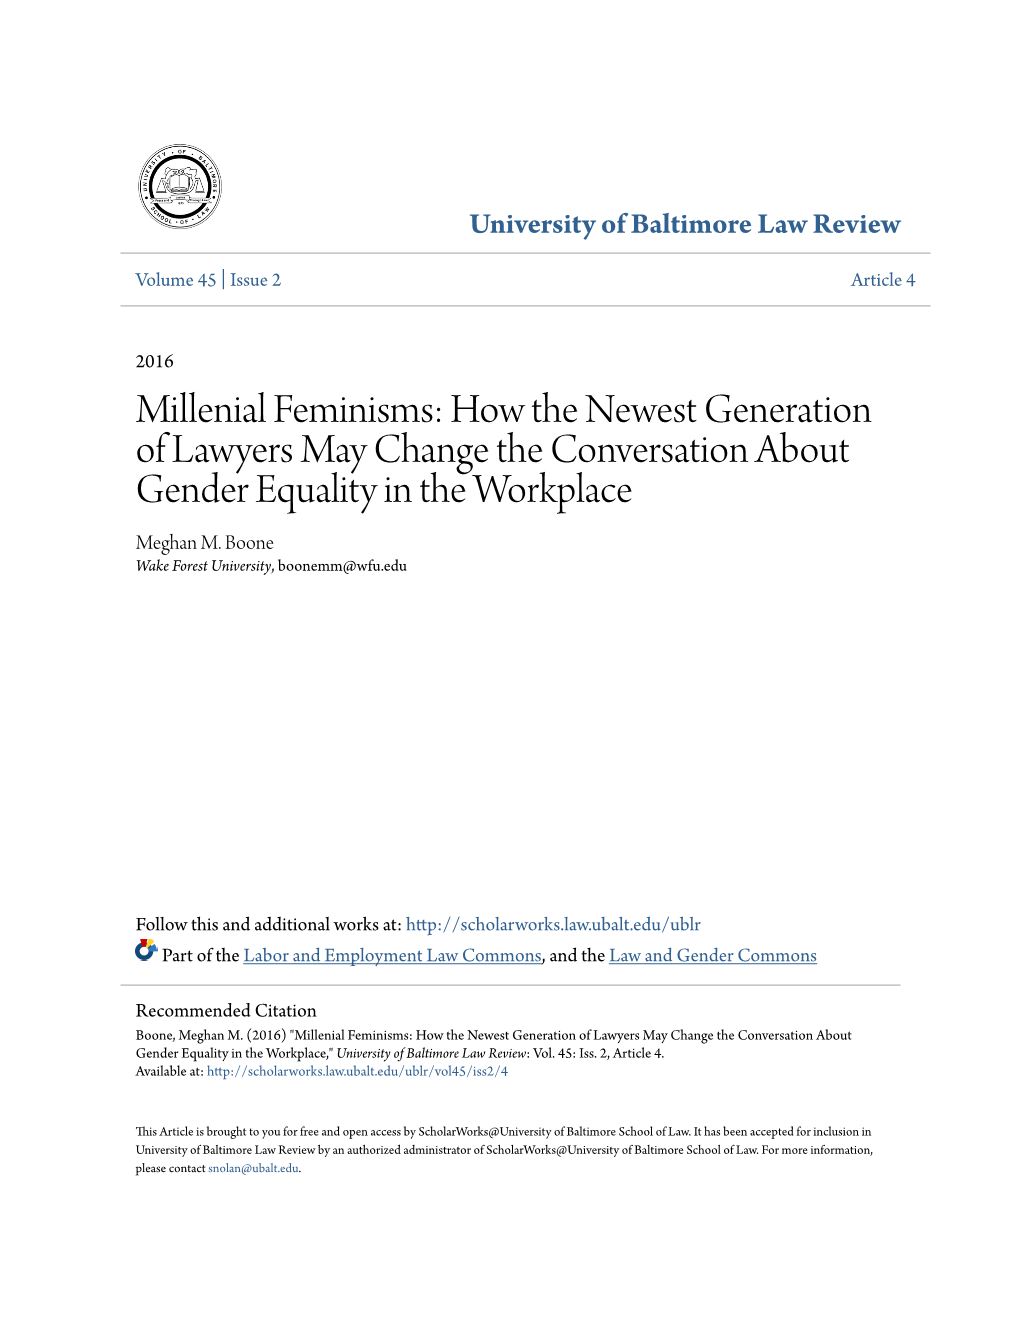 How the Newest Generation of Lawyers May Change the Conversation About Gender Equality in the Workplace Meghan M